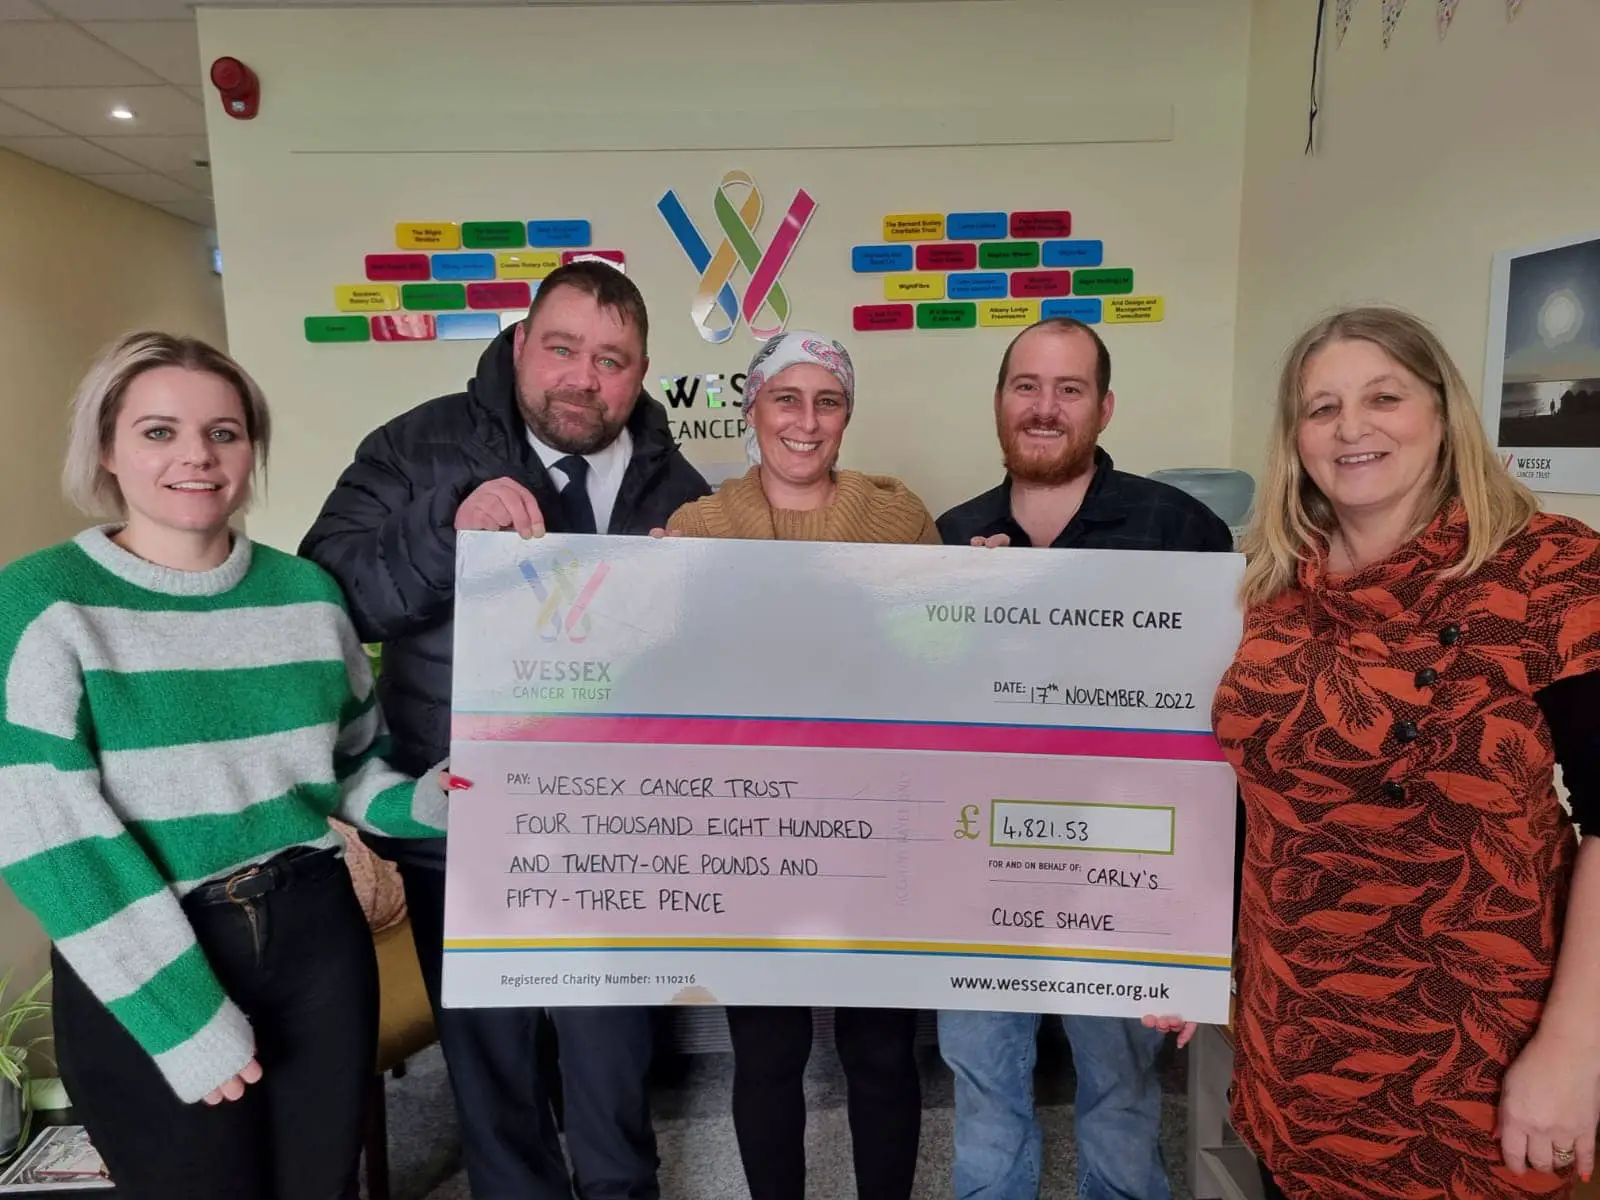 Image: From left to right in attached photo showing Carly coming into Wessex Cancer Trust Support Centre in Newport for cheque presentation; Laura Haytack (Regional Fundraising Manager for Wessex Cancer Trust), Danny Winter (Doorman for Slug and Lettuce), Carly Sanders, Simon Cant (Owner of The Castle Inn), Linda Huntley (Wessex Cancer Trust Volunteer)